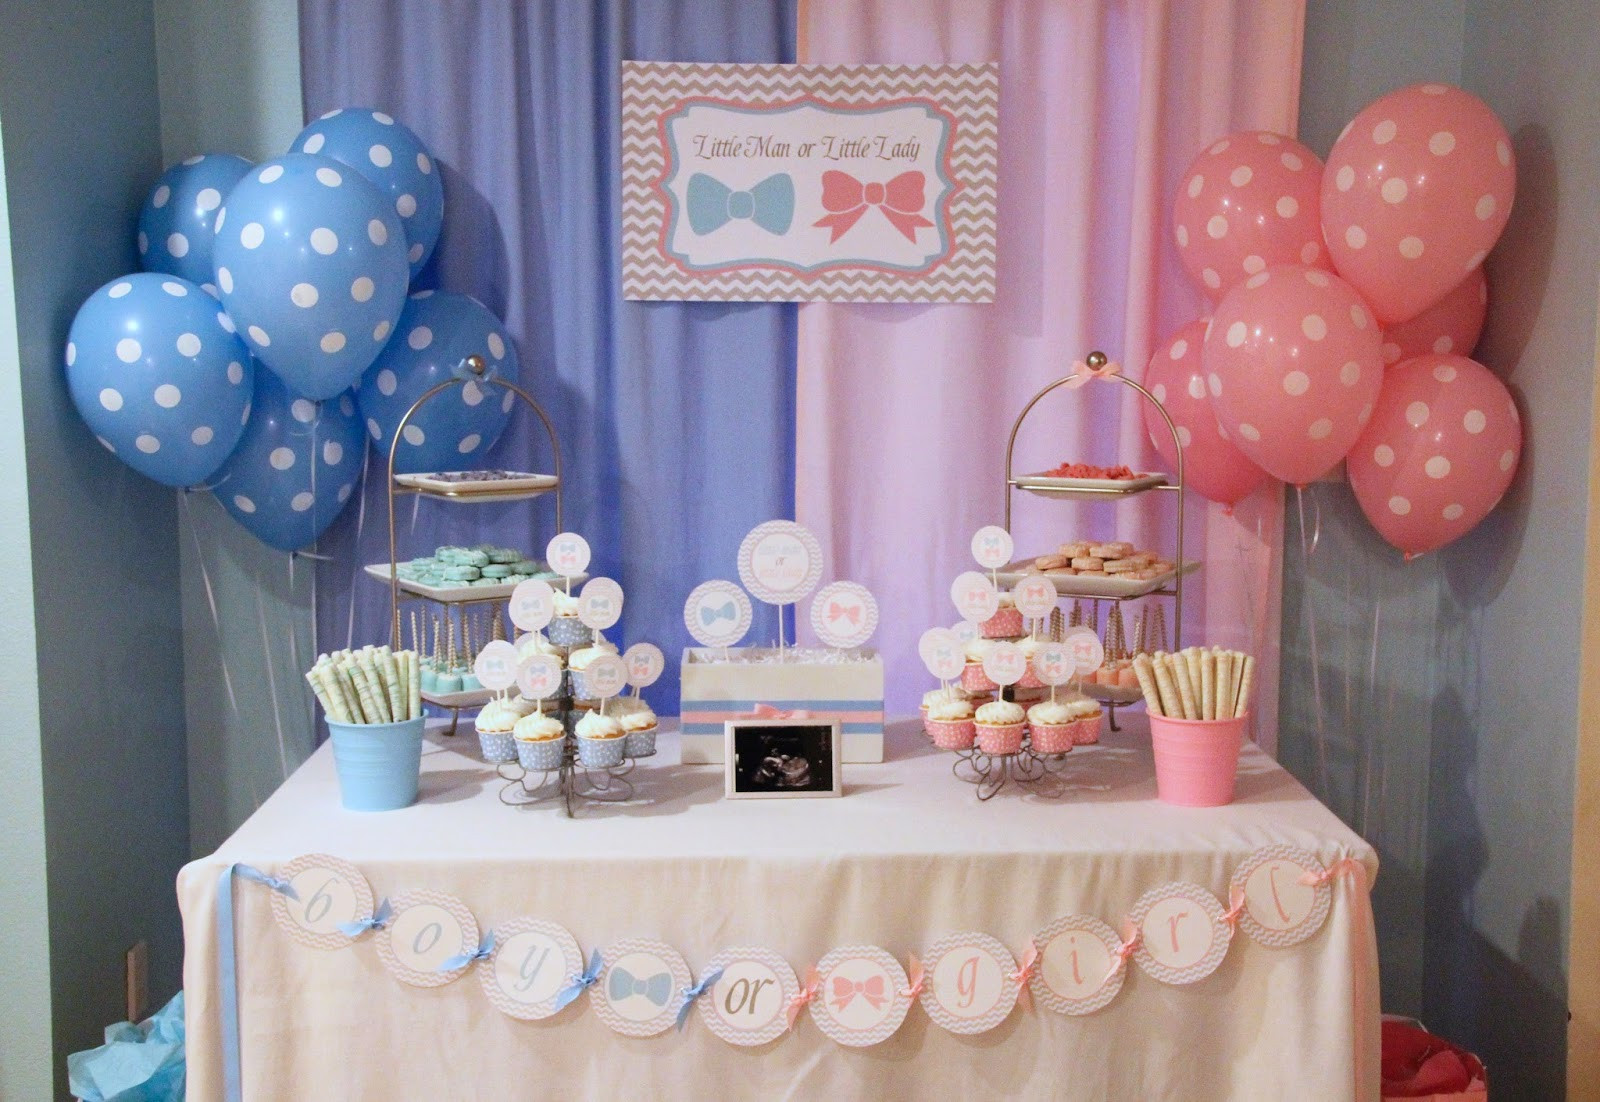 Gender Reveal Ideas For Party
 5M Creations Gender Reveal Party Little Man or Little Lady